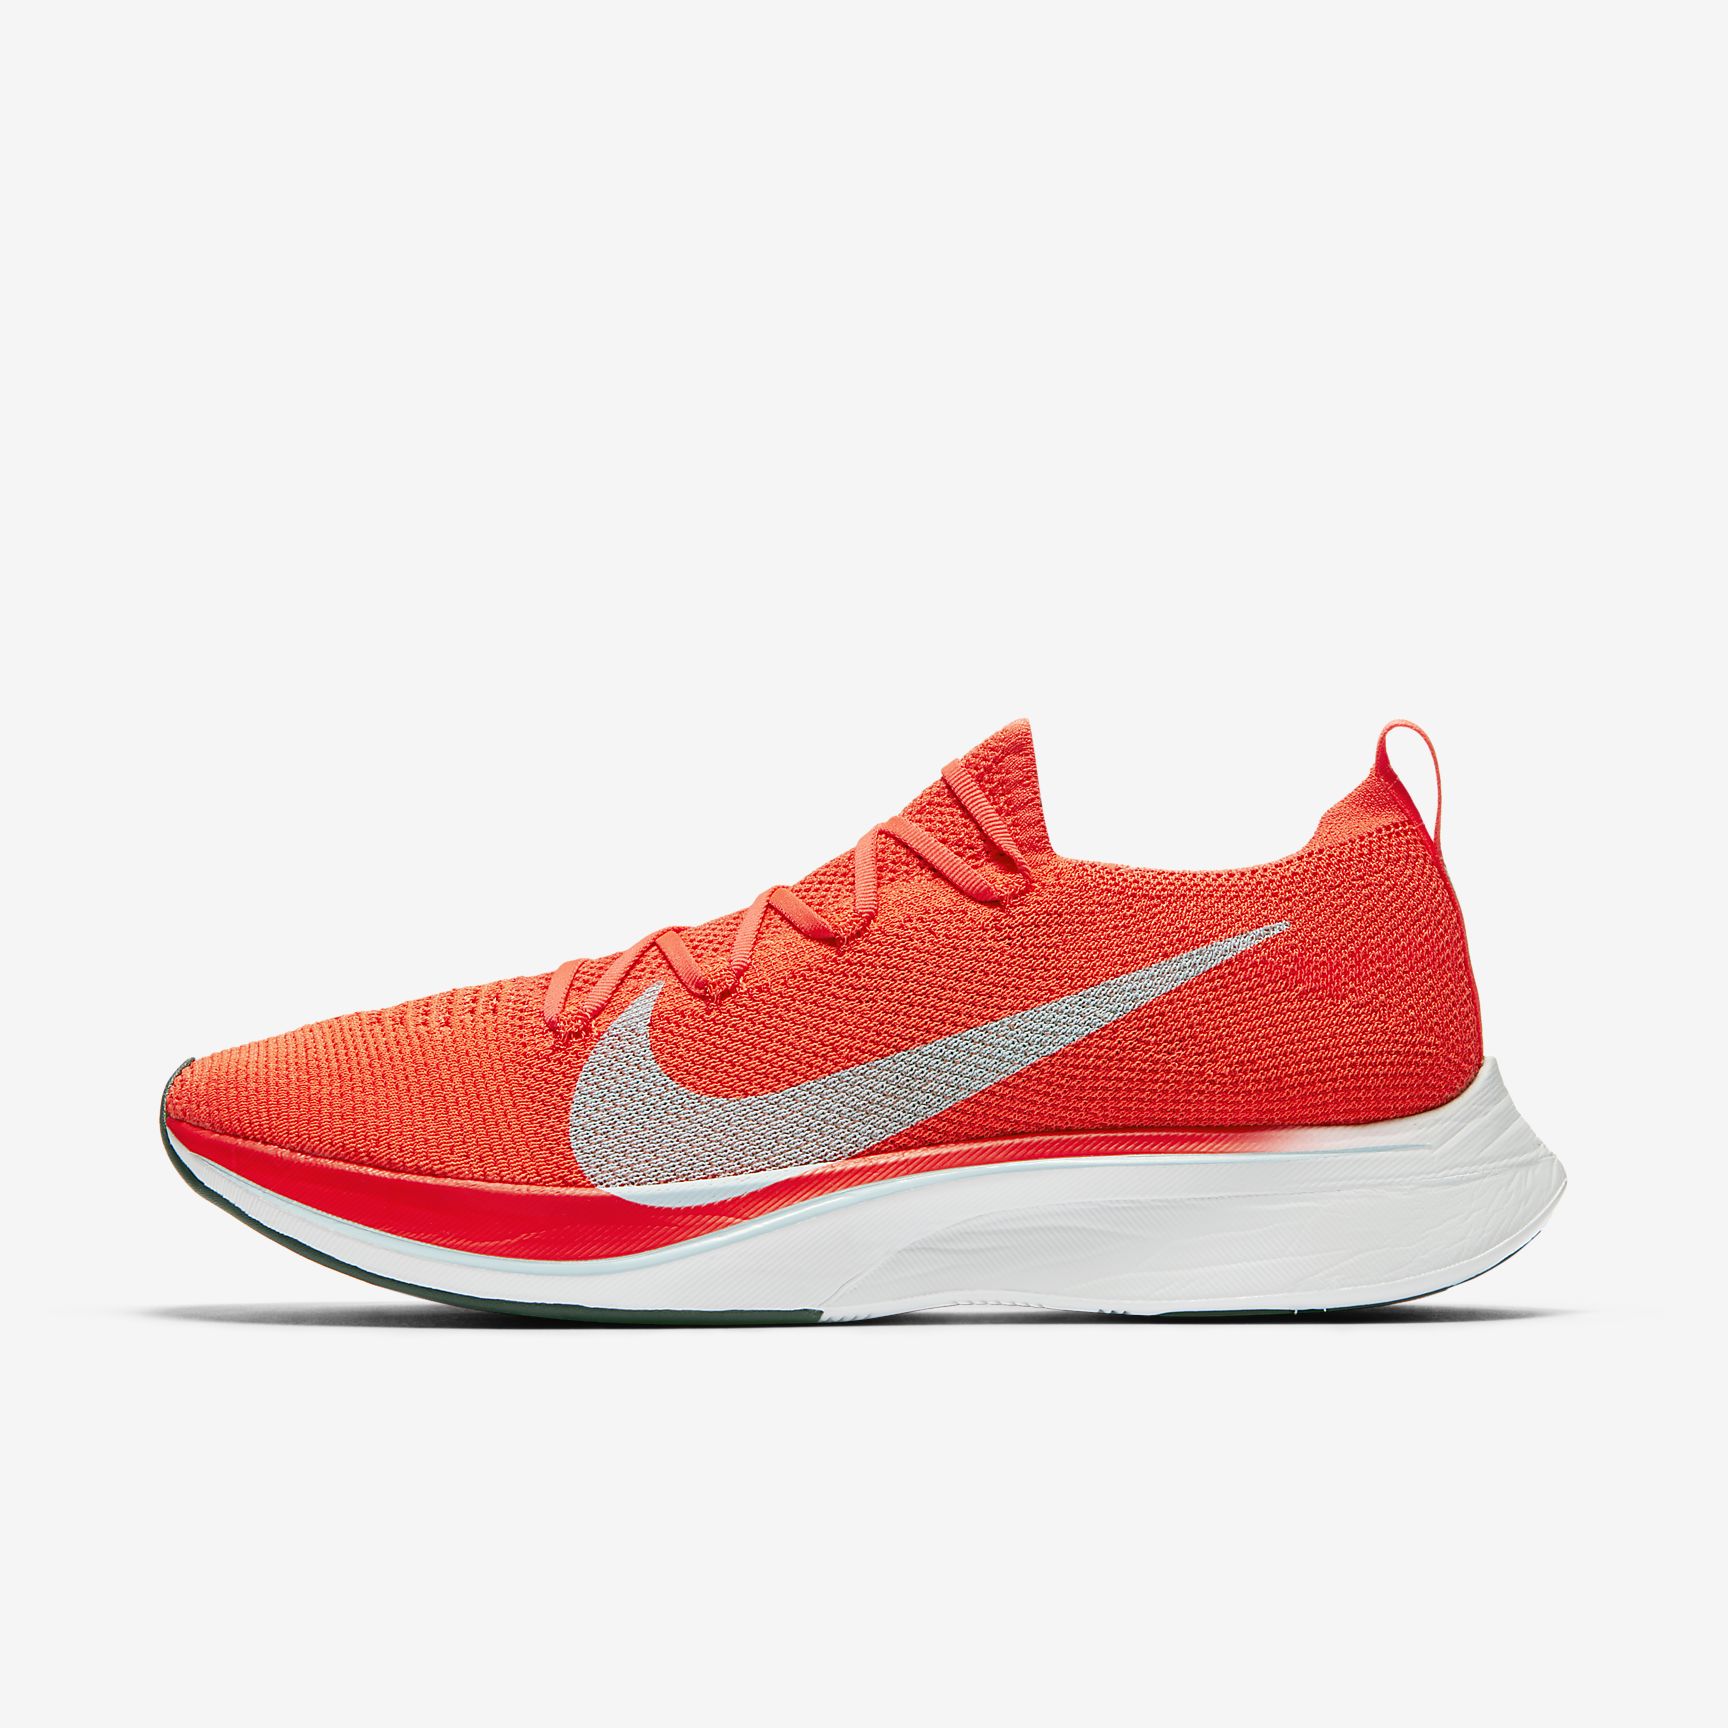 vaporfly 4 weight